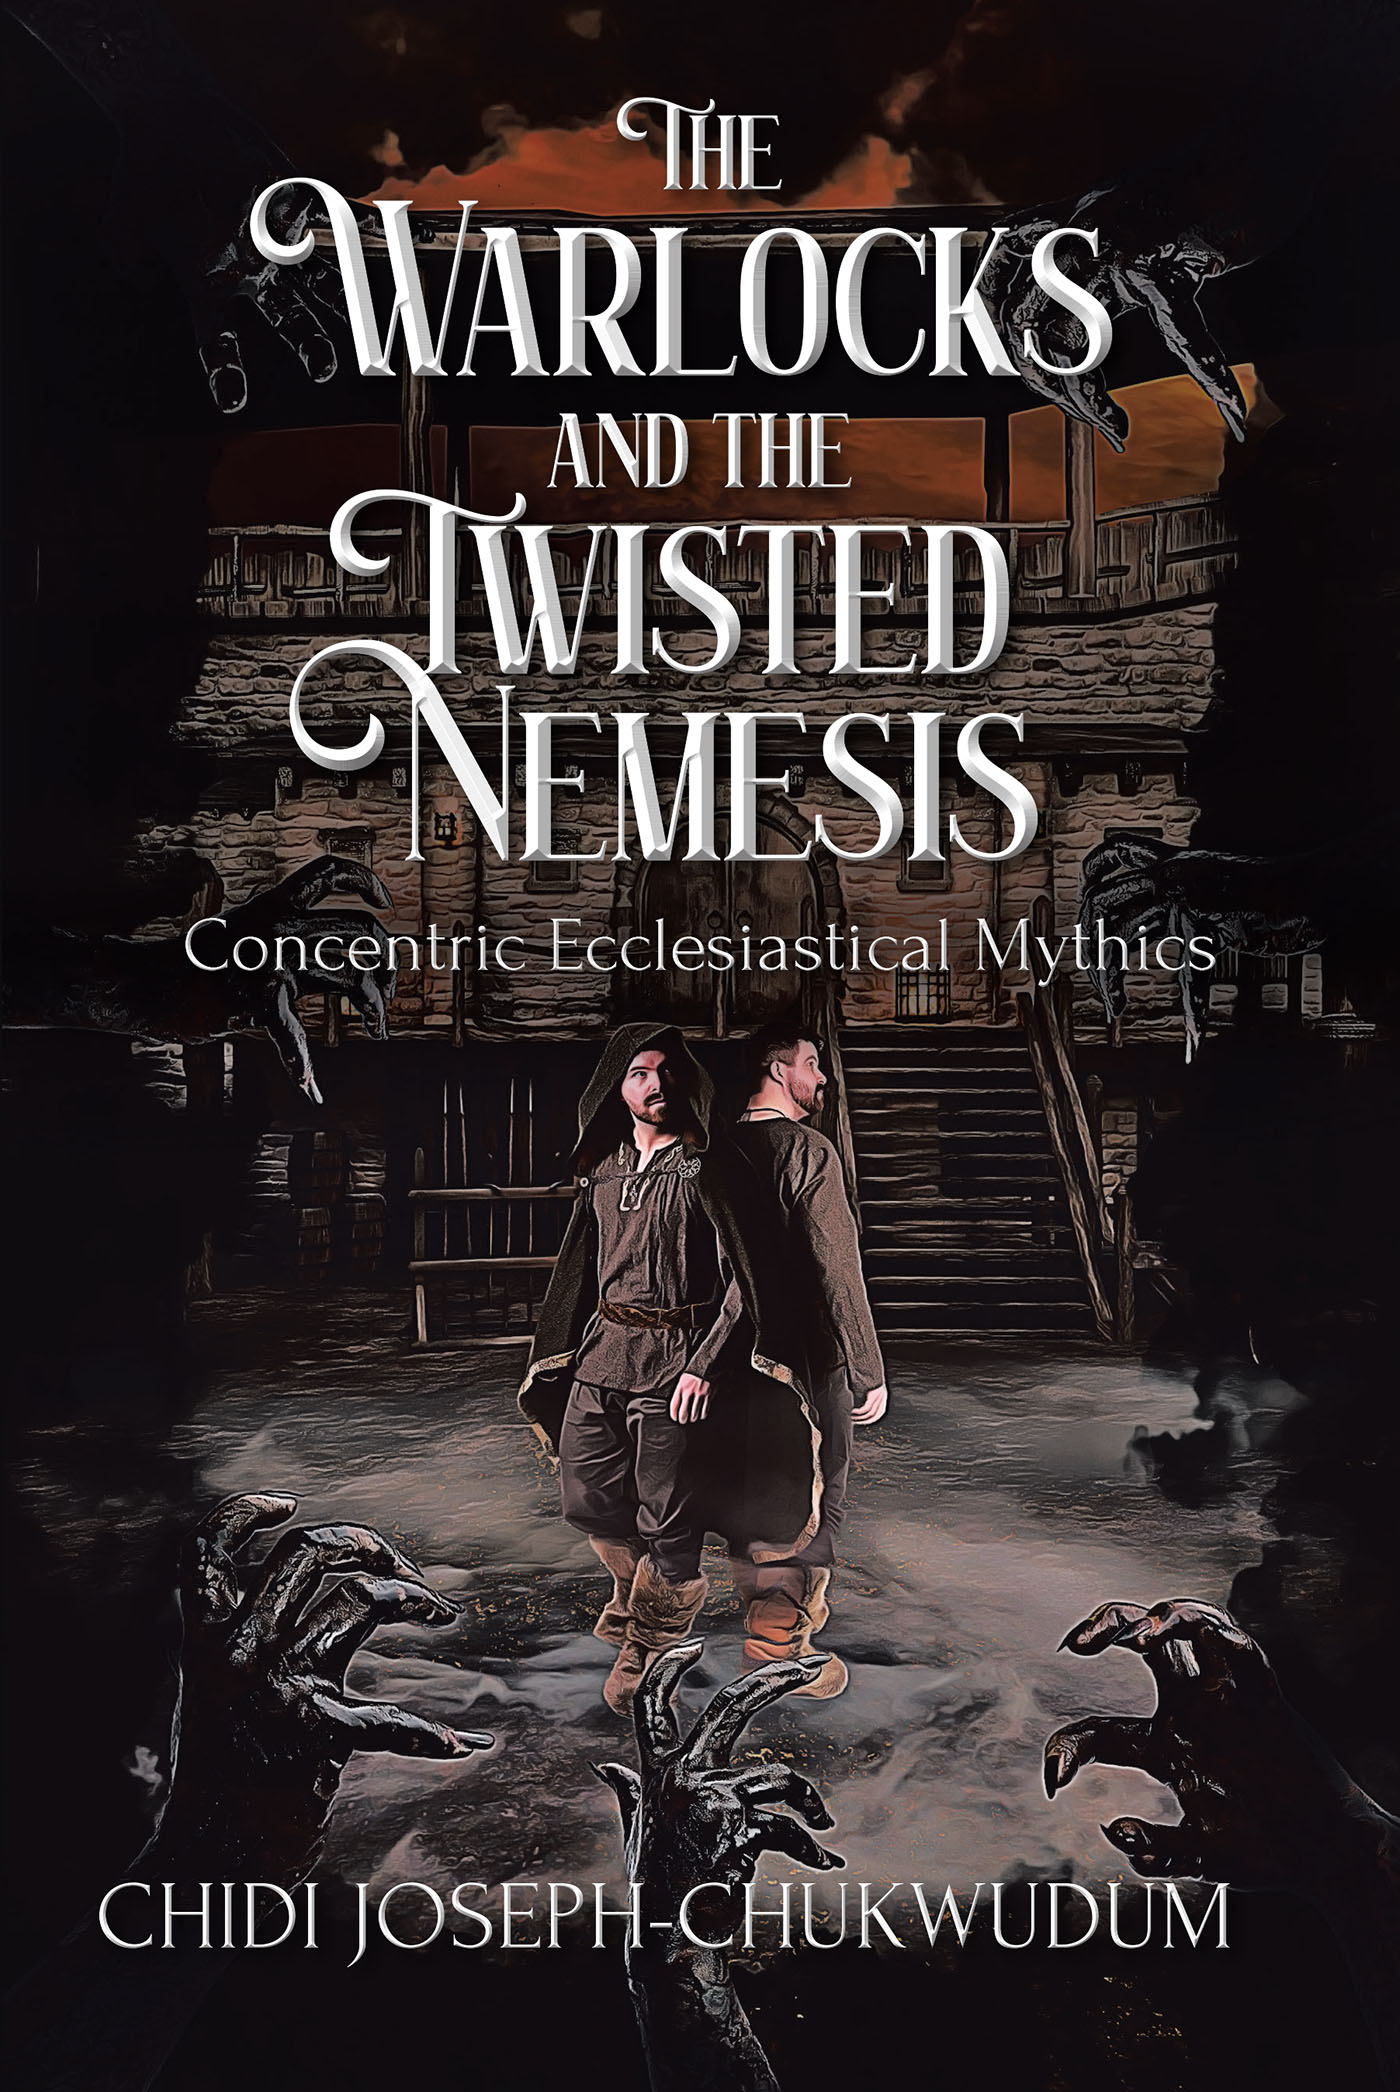 Chidi Joseph-Chukwudum’s Newly Released "The Warlocks and the Twisted Nemesis: Concentric Ecclesiastical Mythics" is an Imaginative Tale of Good Versus Evil